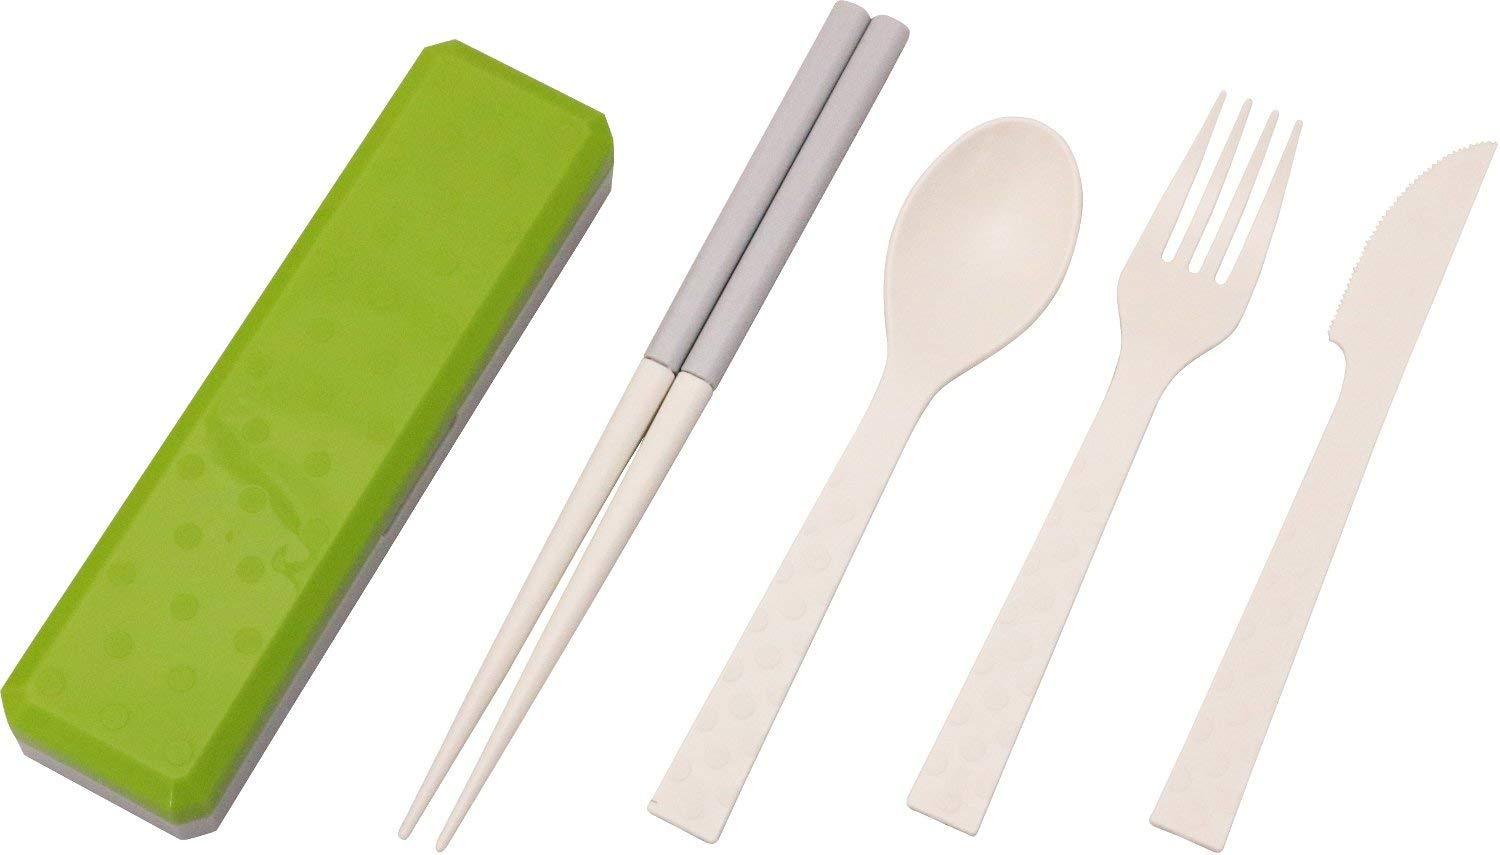 GO OUT Cutlery | Greenery by Kokubo - Bento&co Japanese Bento Lunch Boxes and Kitchenware Specialists